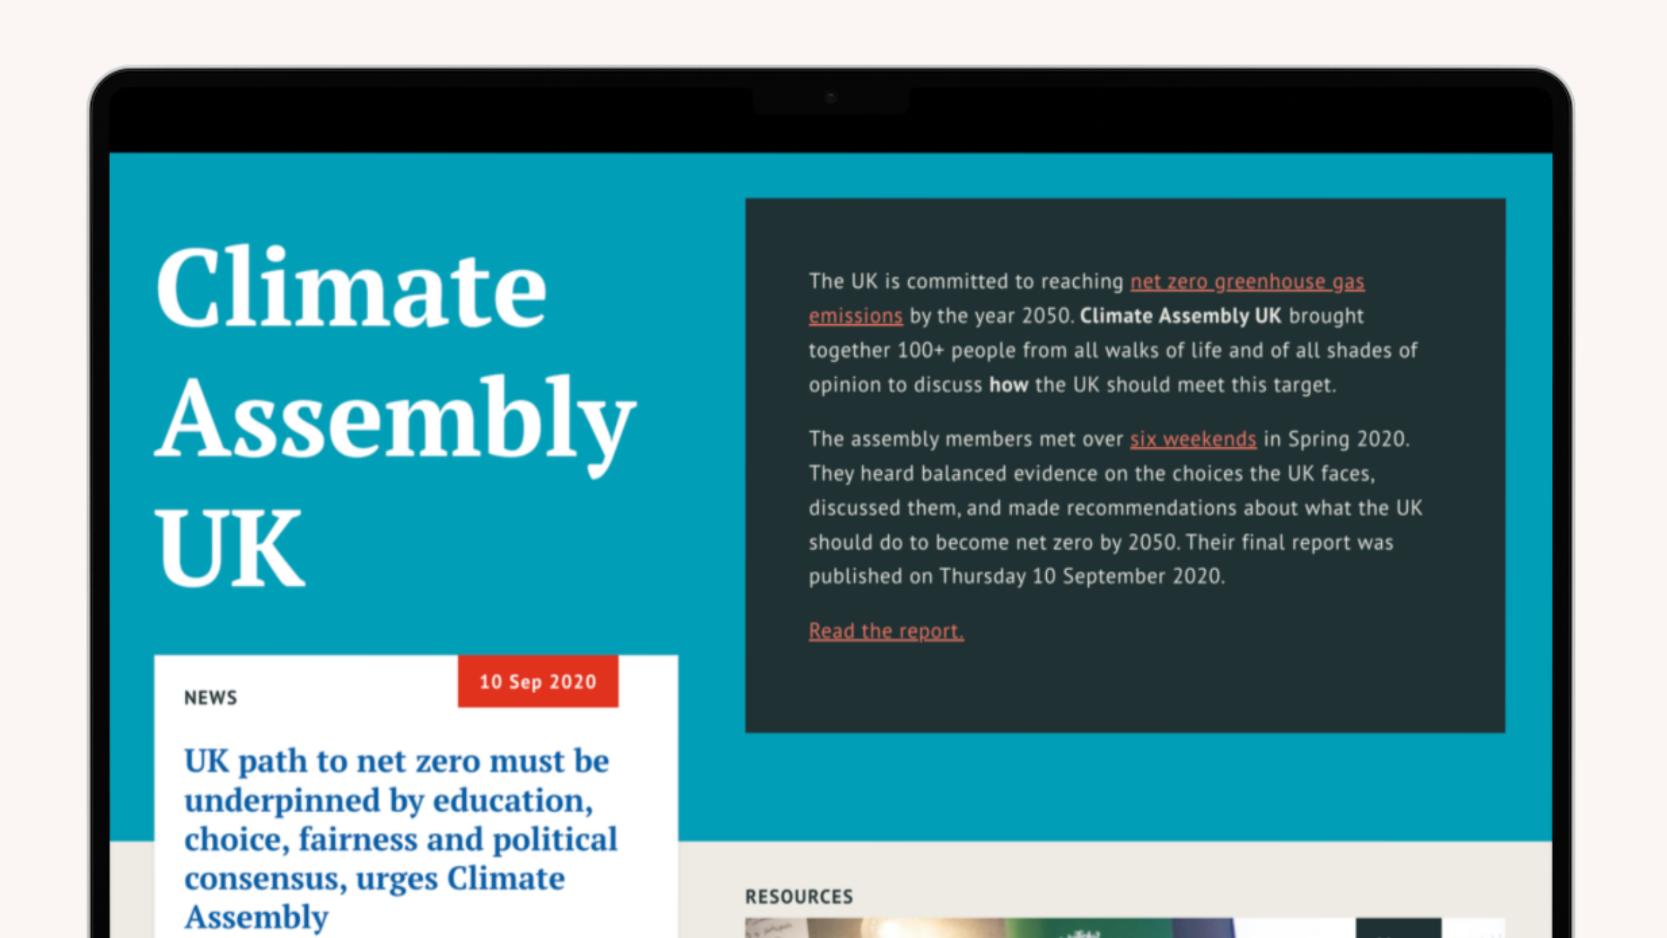 Mockup of the landing page for UK's climate assembly